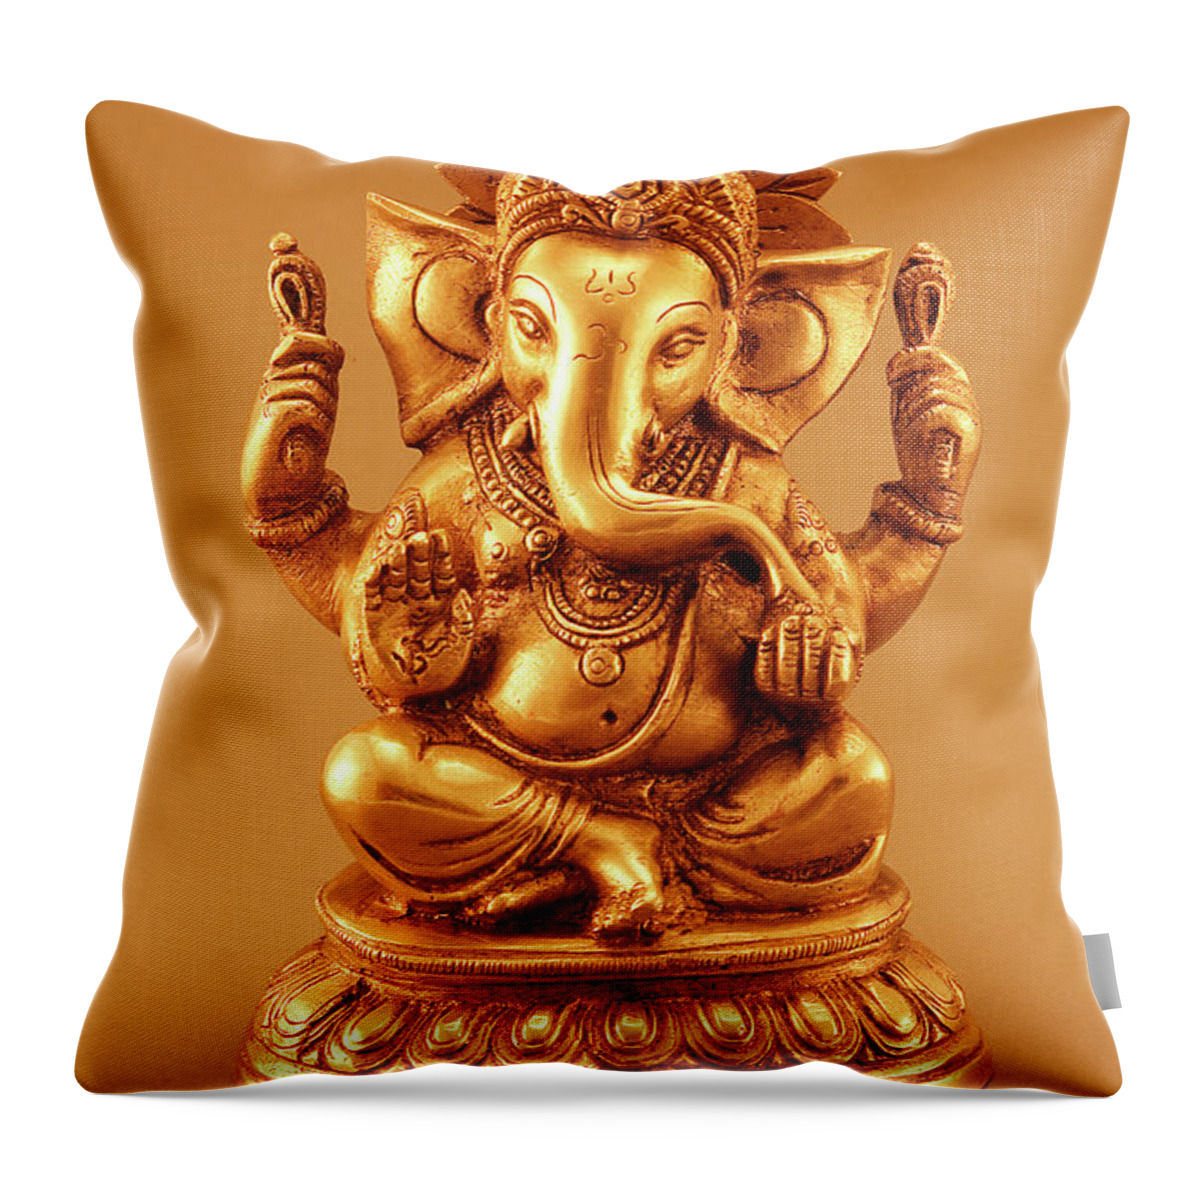 Hinduism Throw Pillow featuring the photograph Statue Of Lord Ganesh #1 by Visage